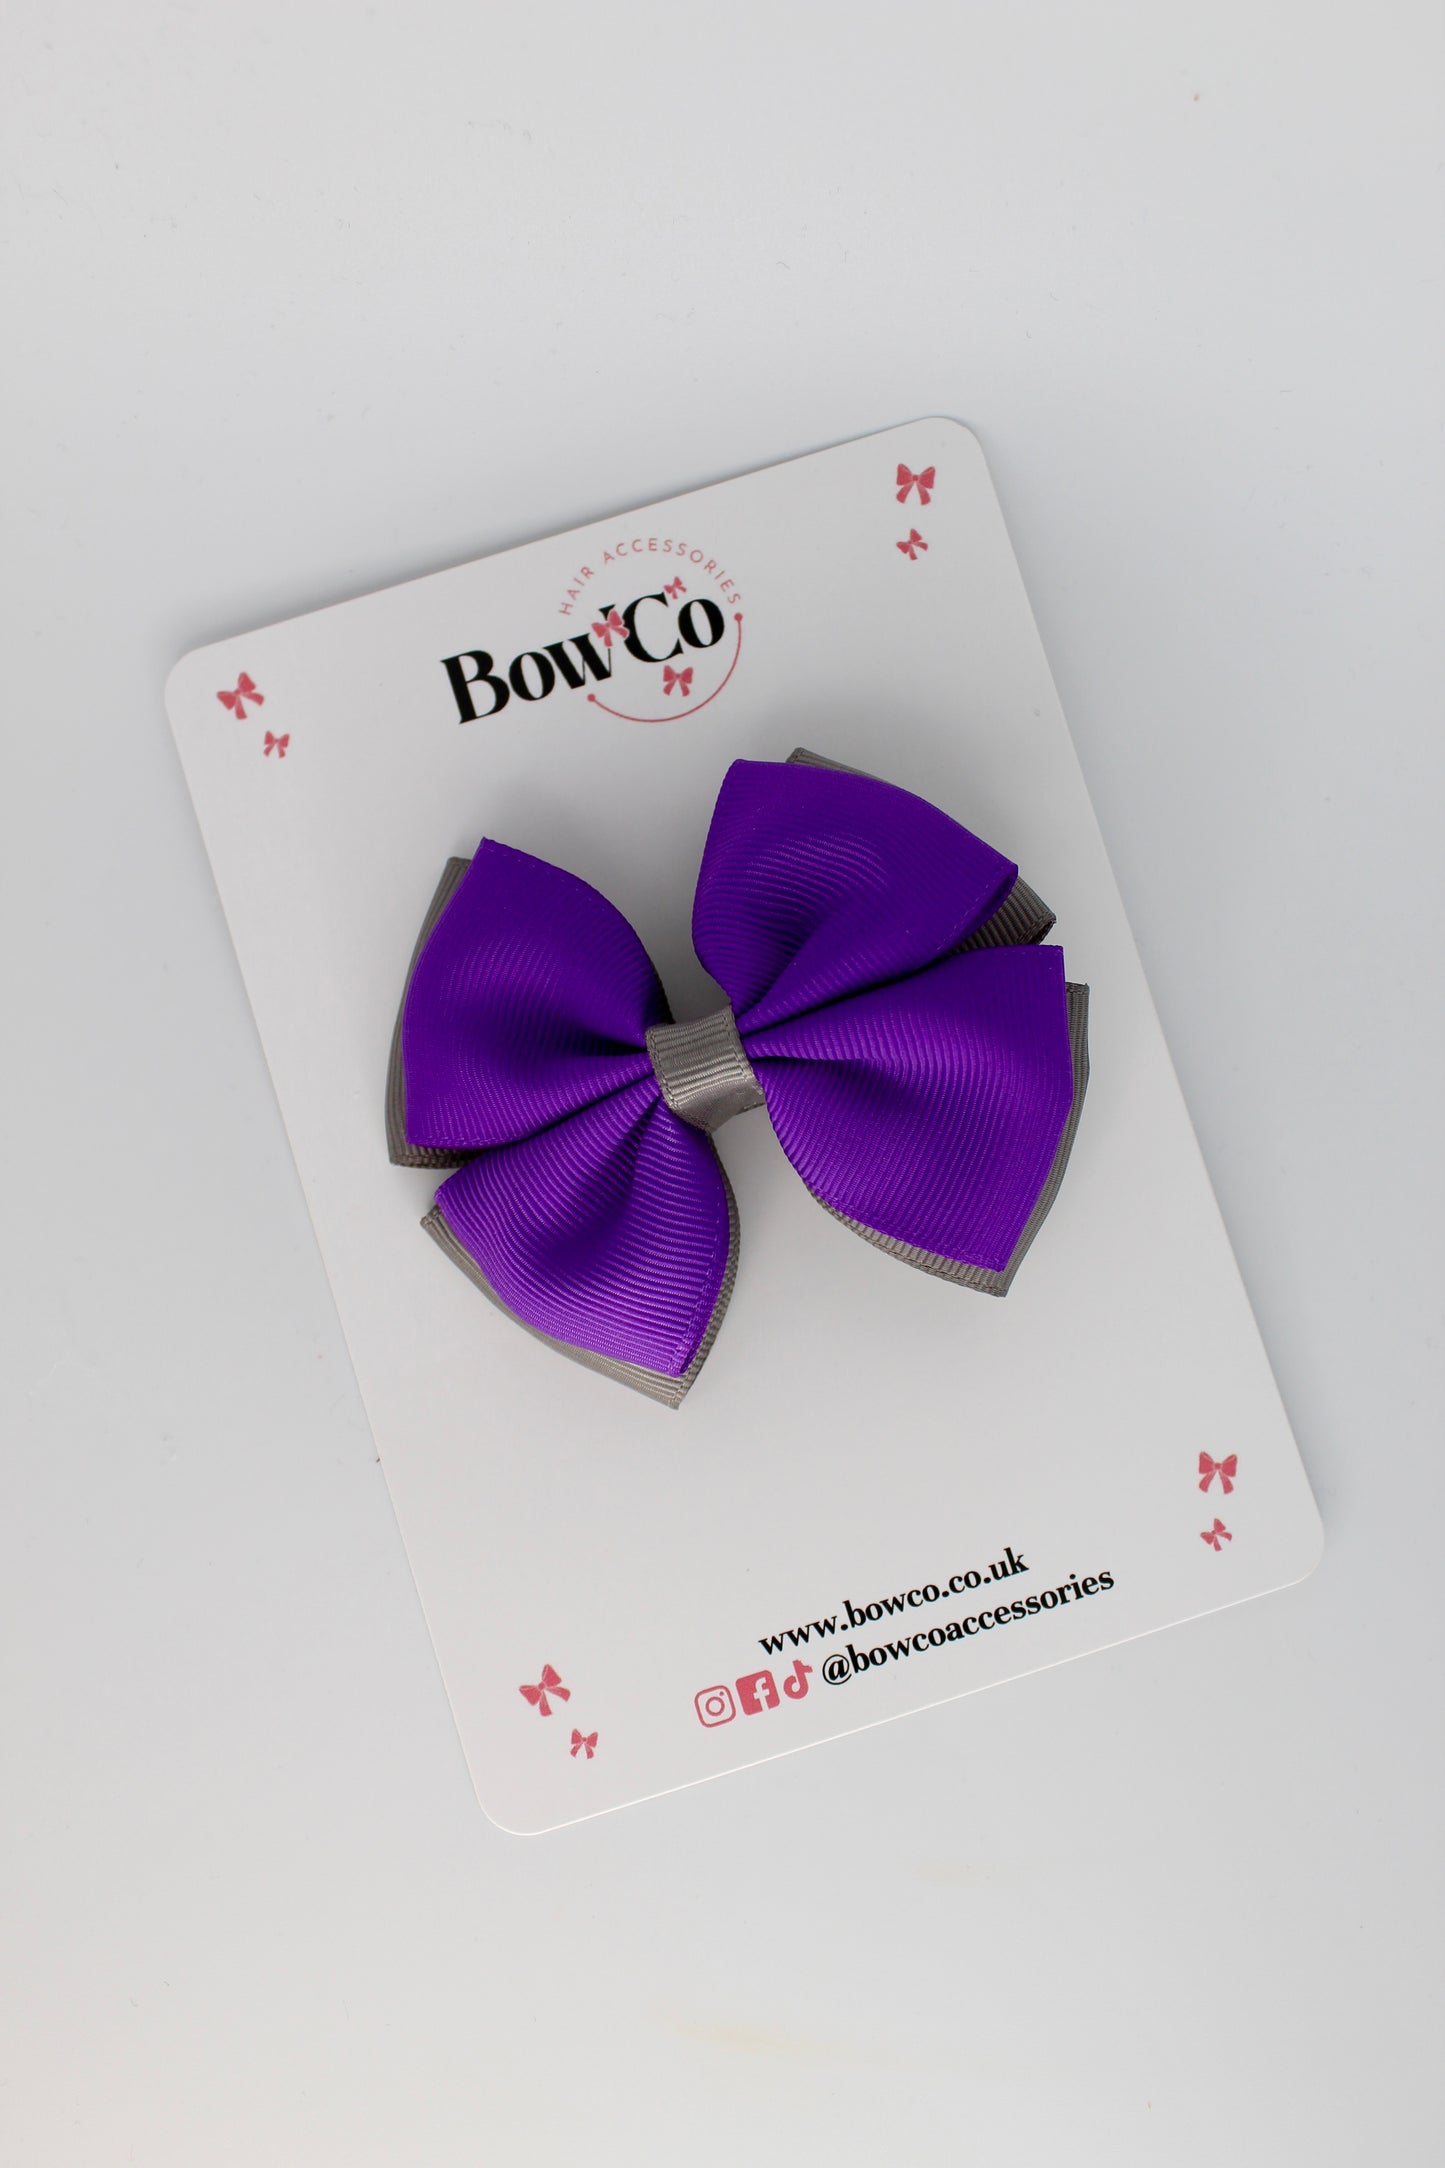 3 Inch Double Layer Bow - Clip - Purple and Metal Grey